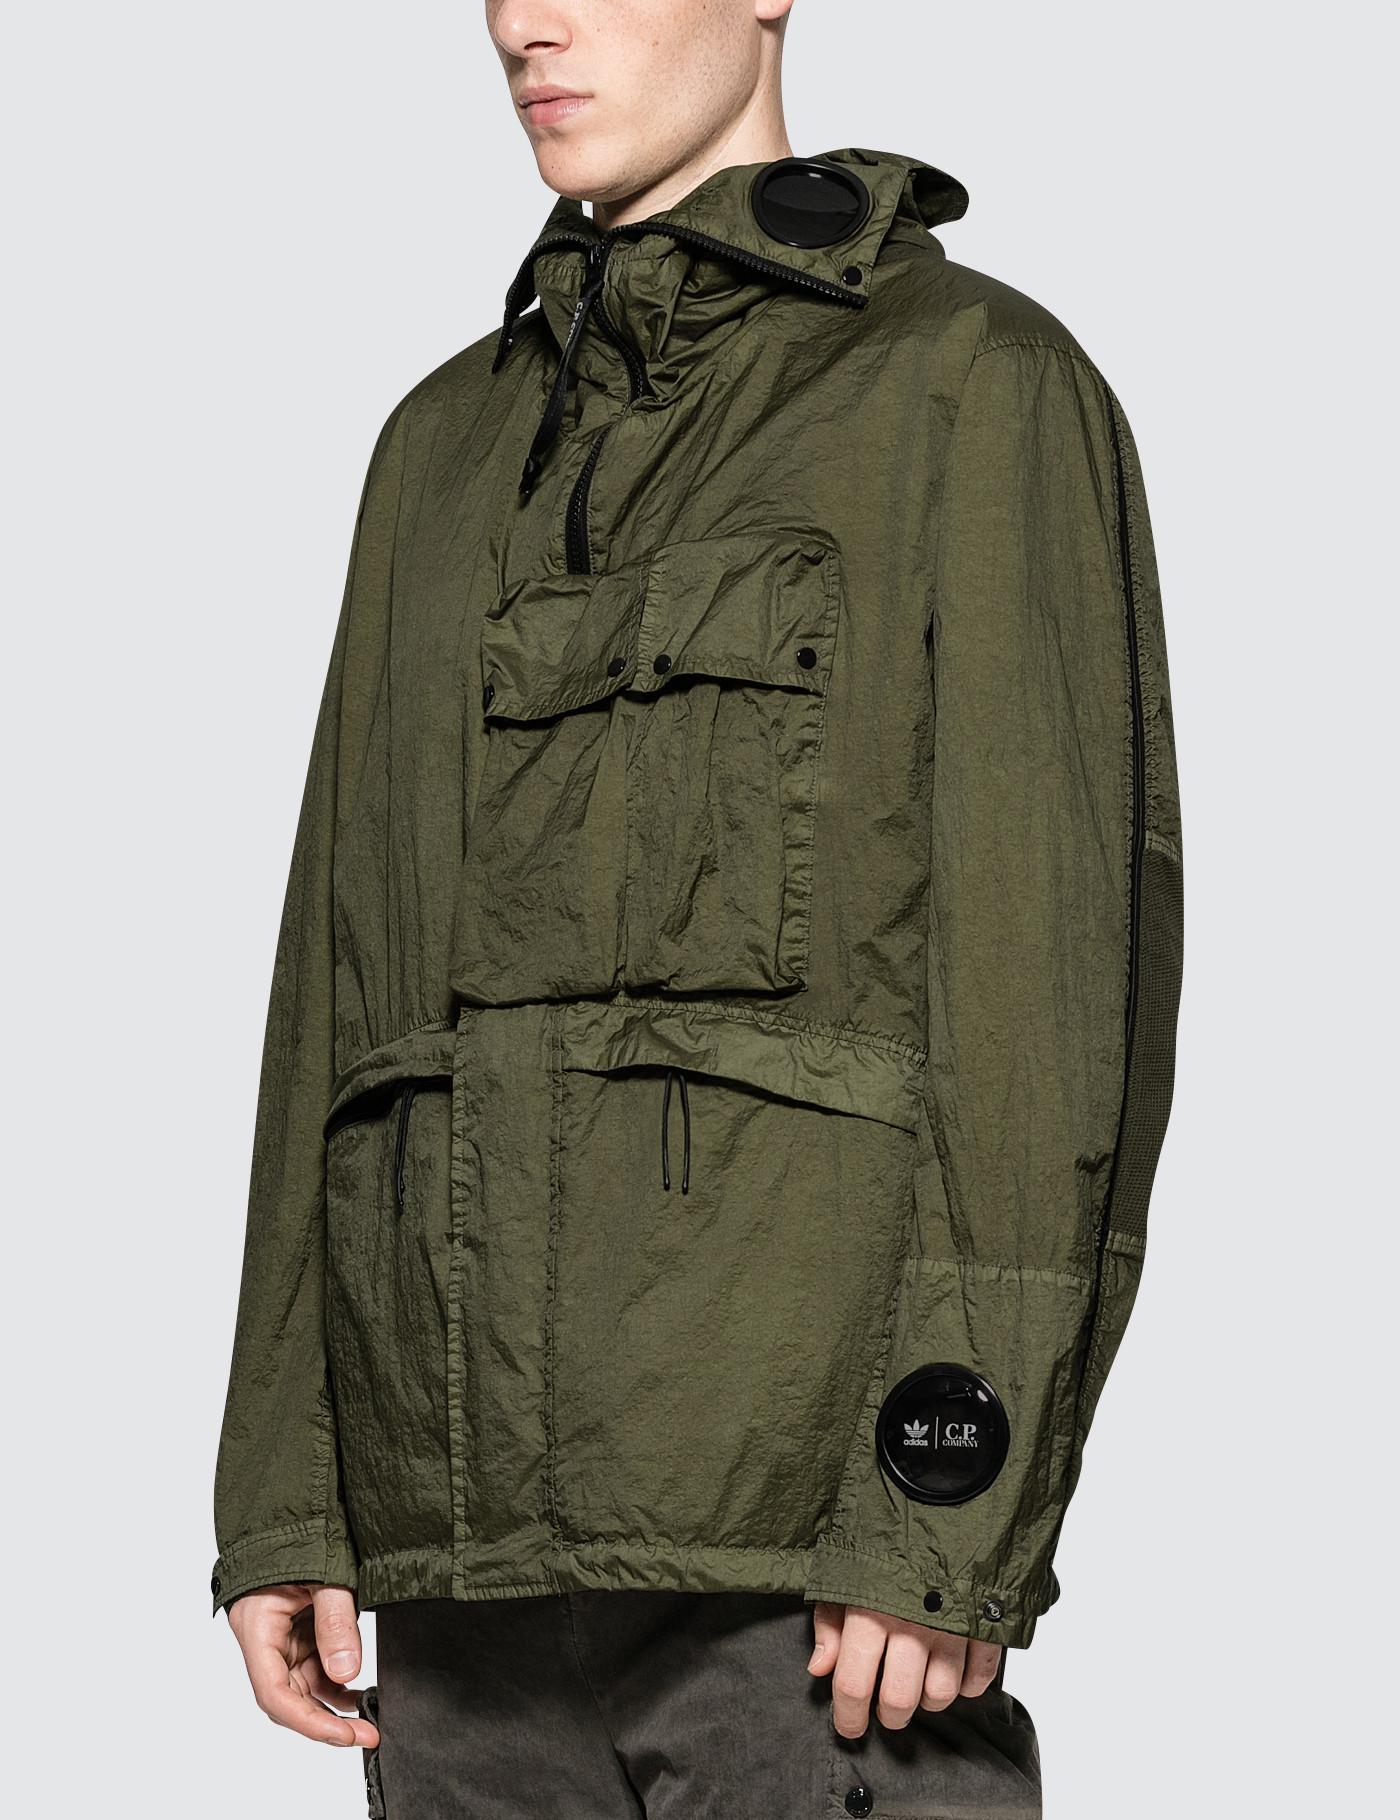 Cp Company Adidas Explorer Jacket Hot Sale, UP TO 57% OFF | www.seo.org